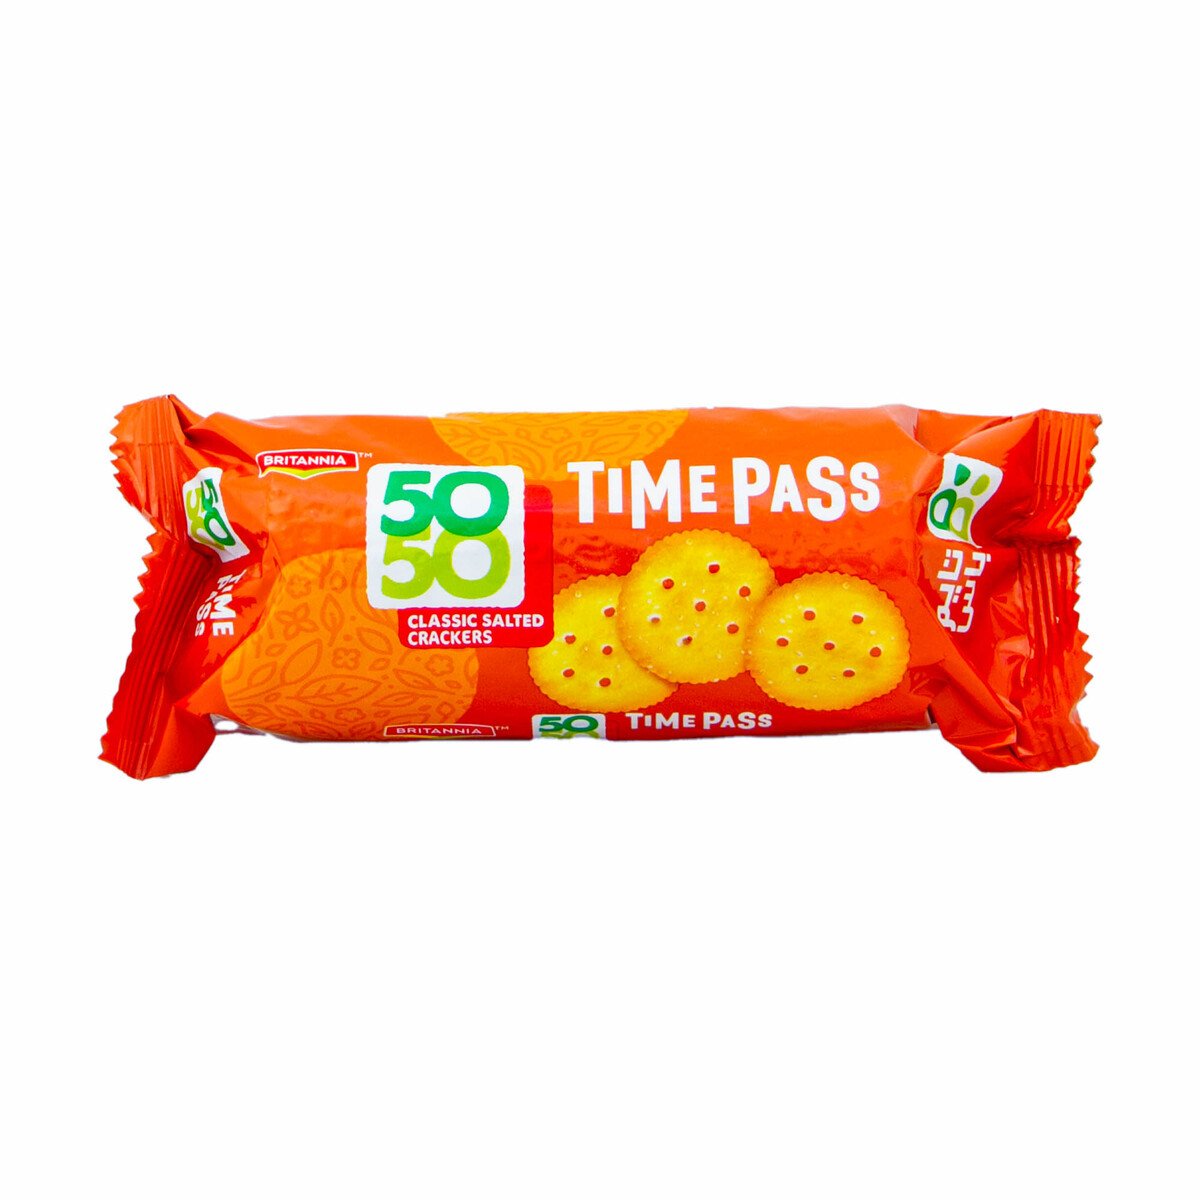 Britannia Time Pass 50-50 Classic Salted Crackers 40g